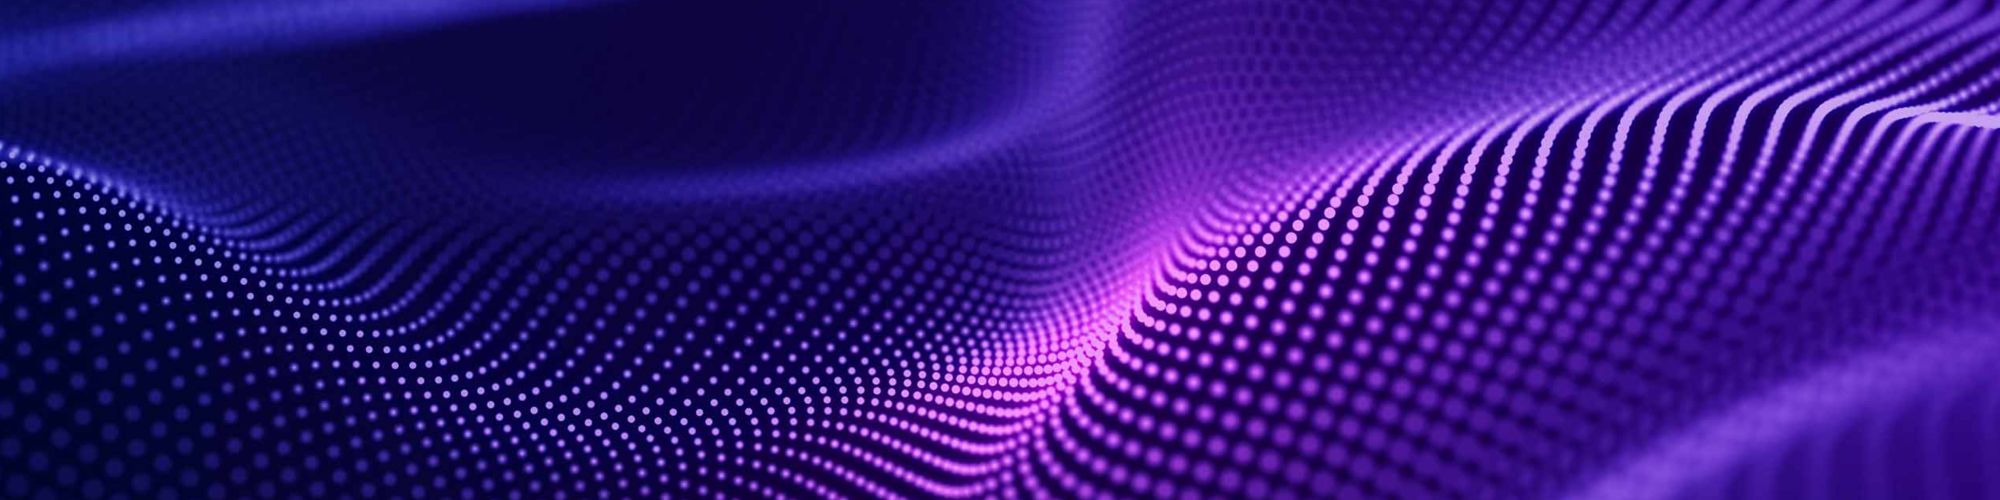 Abstract wave background with many glowing particles. Musical wave. Digital network background. 3D rendering.